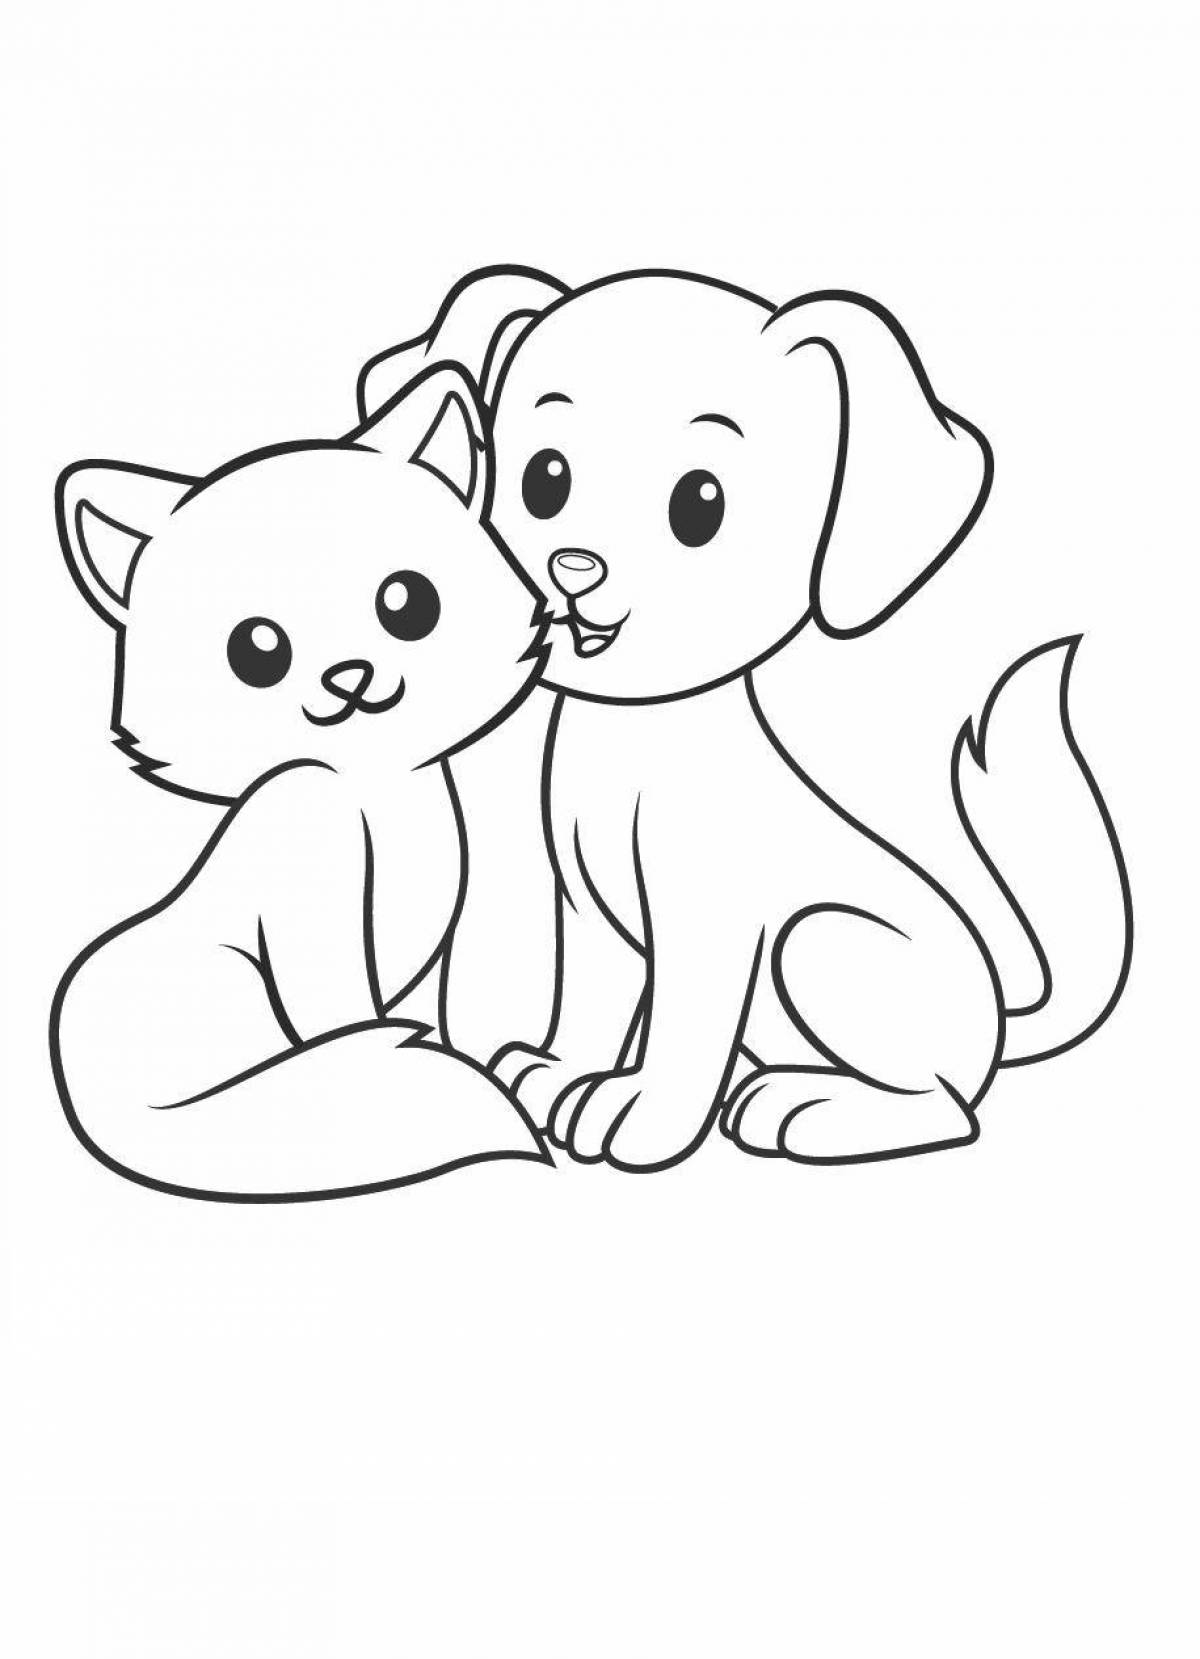 Fancy cat and dog coloring pages for kids 3 4 years old